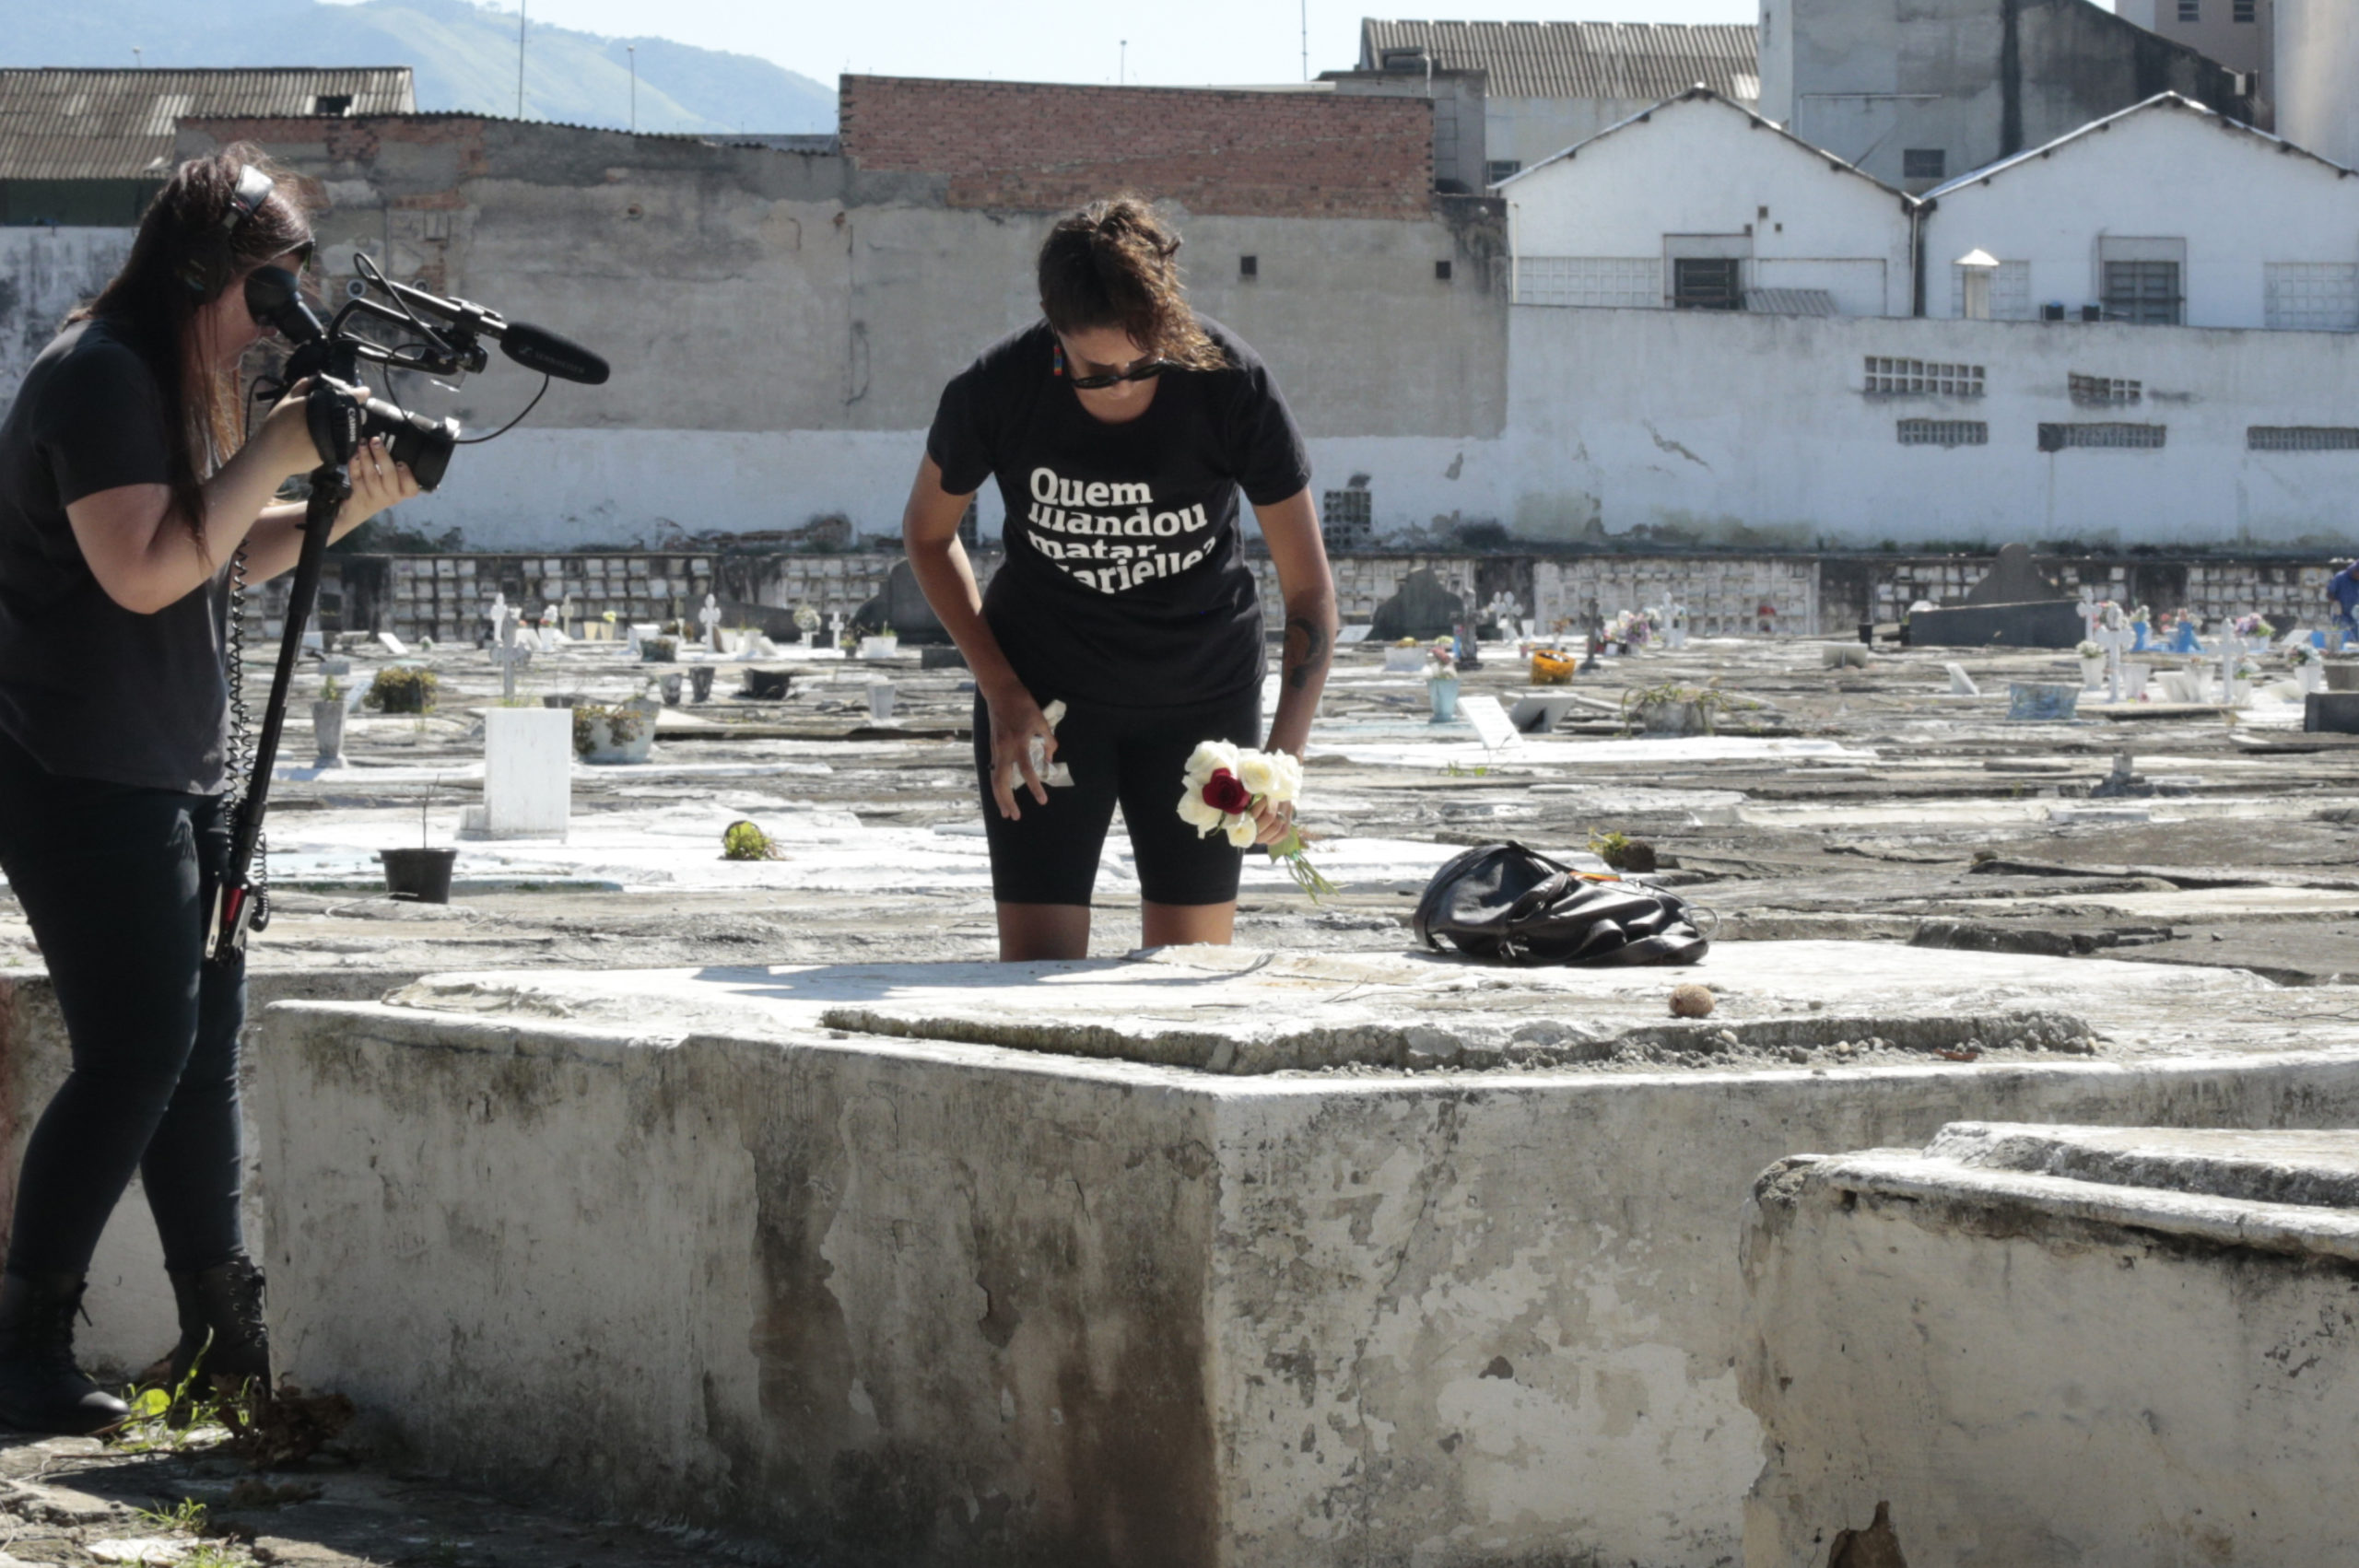 Two people in a cemetery appear to be filming. One holds a camera while the other, holding a bouquet of flowers, stands near a grave, wearing a T-shirt with Portuguese text. In the background are various gravestones and buildings—a potential project by Berkeley Journalism students capturing poignant moments.